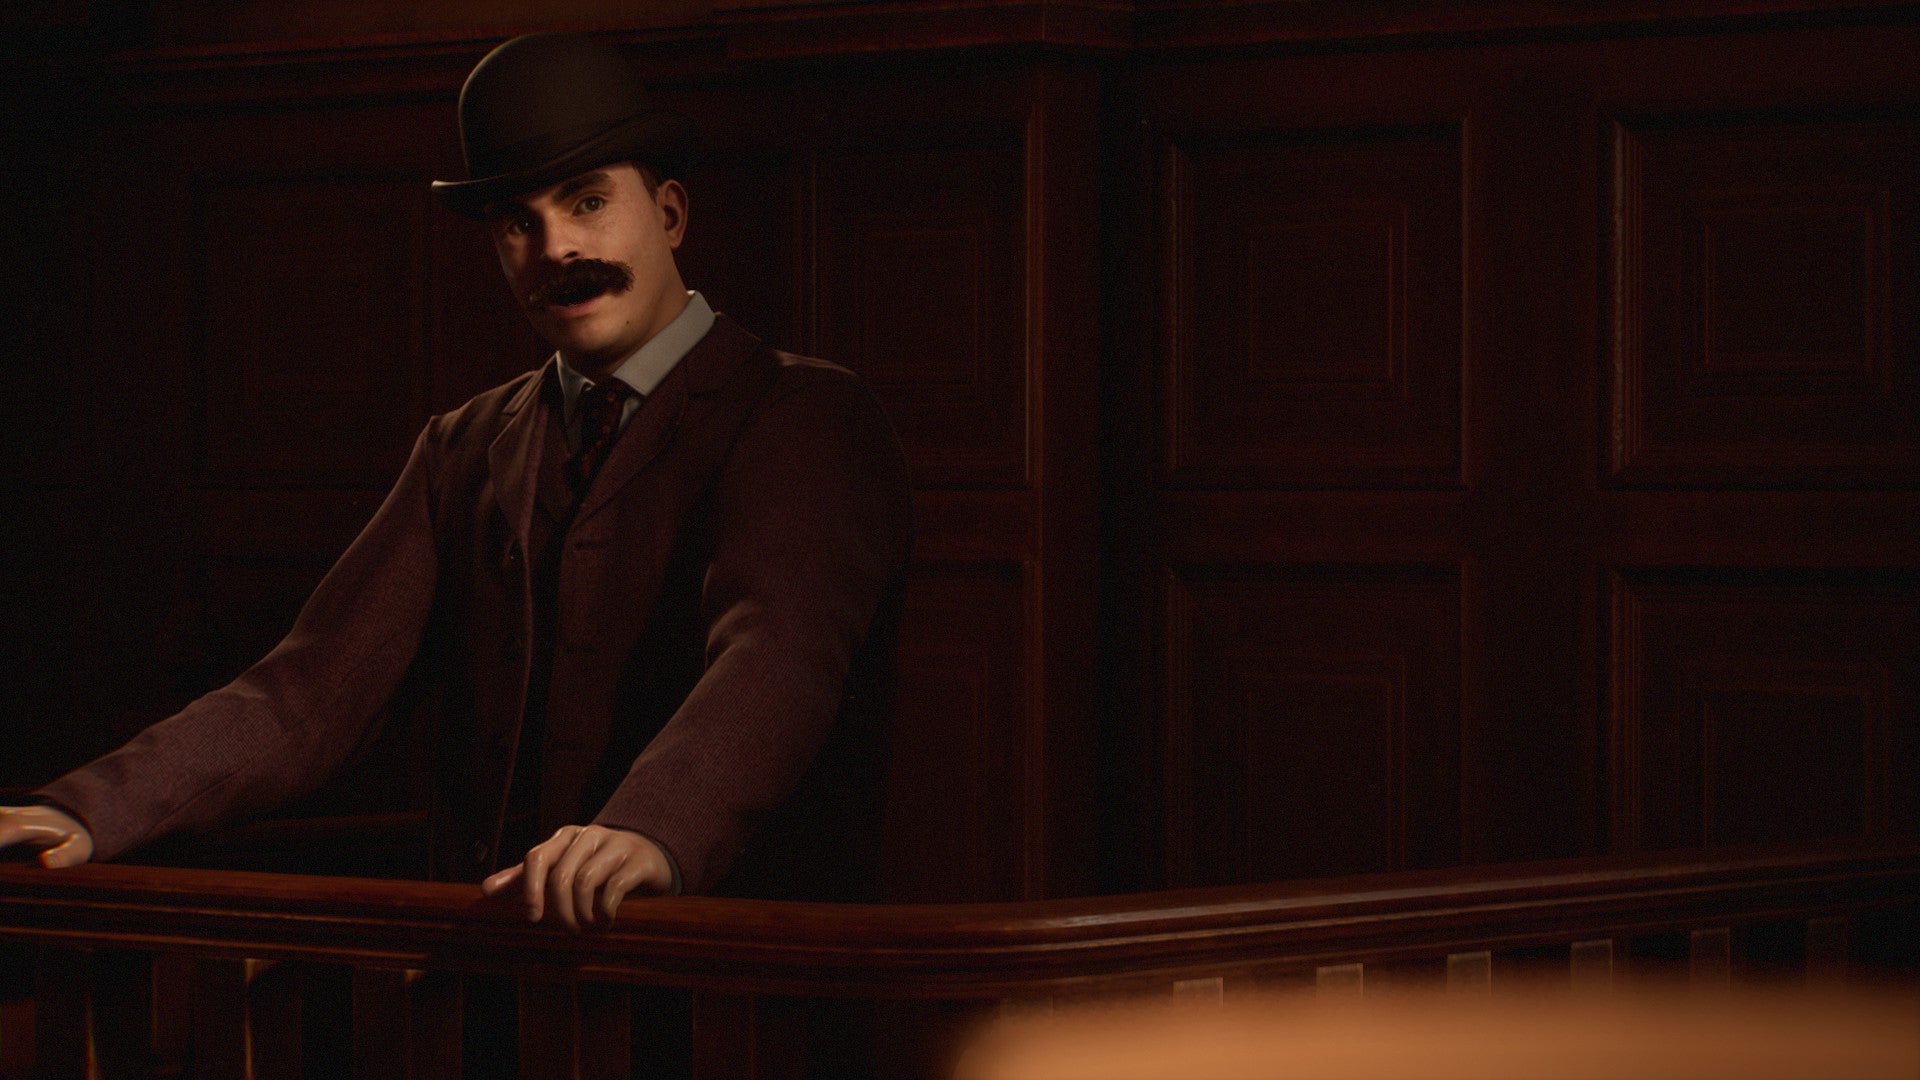 A screenshot from The Devil In Me showing a man in a suit and bowler hat speaking on the stand in a courtroom